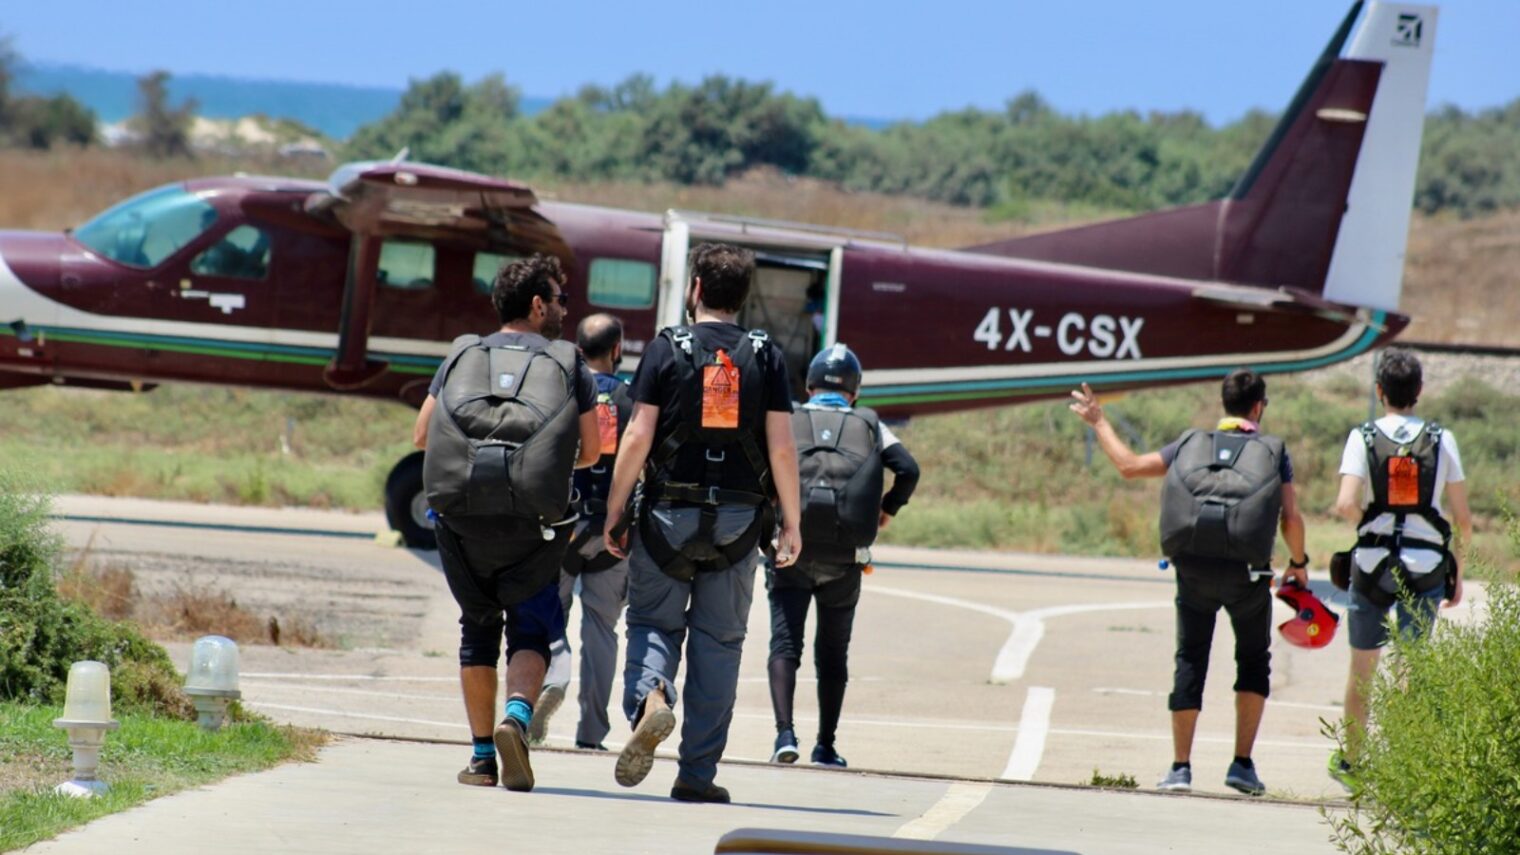 Skydivers at Paradive heading to the plane. Photo by Merav Blum